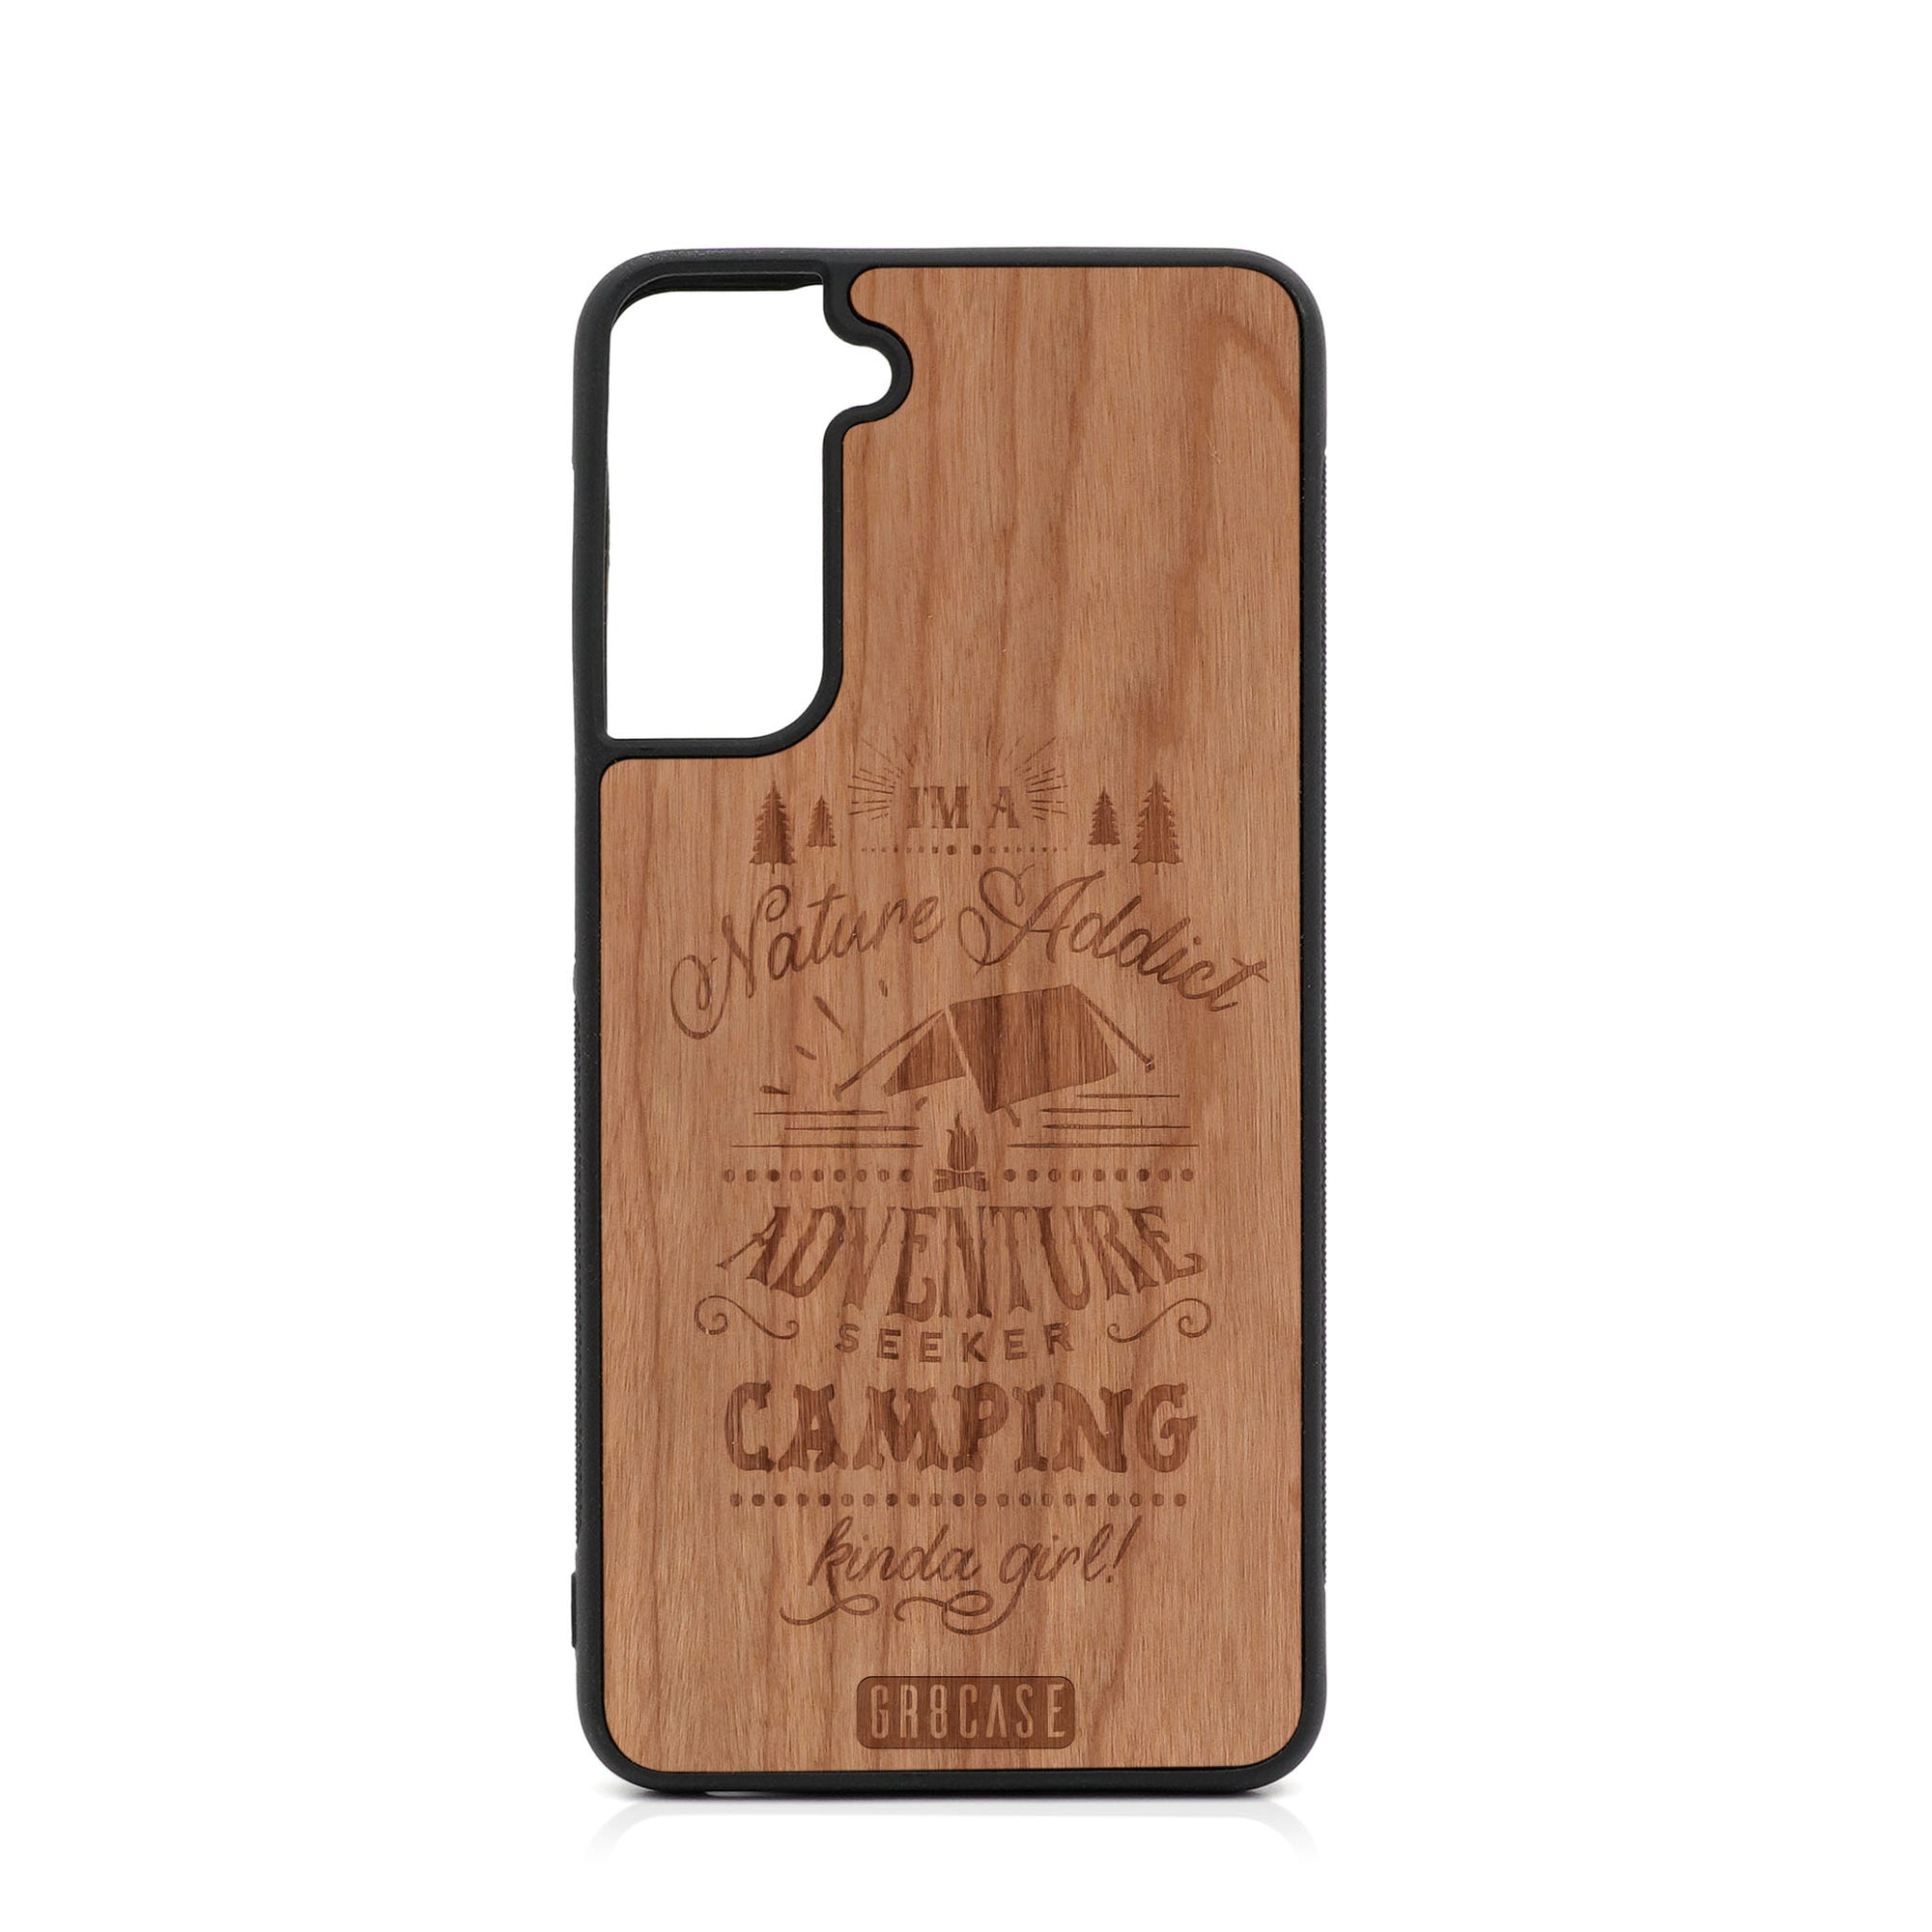 I'm A Nature Addict Adventure Seeker Camping Kinda Girl Design Wood Case For Samsung Galaxy S21 5G